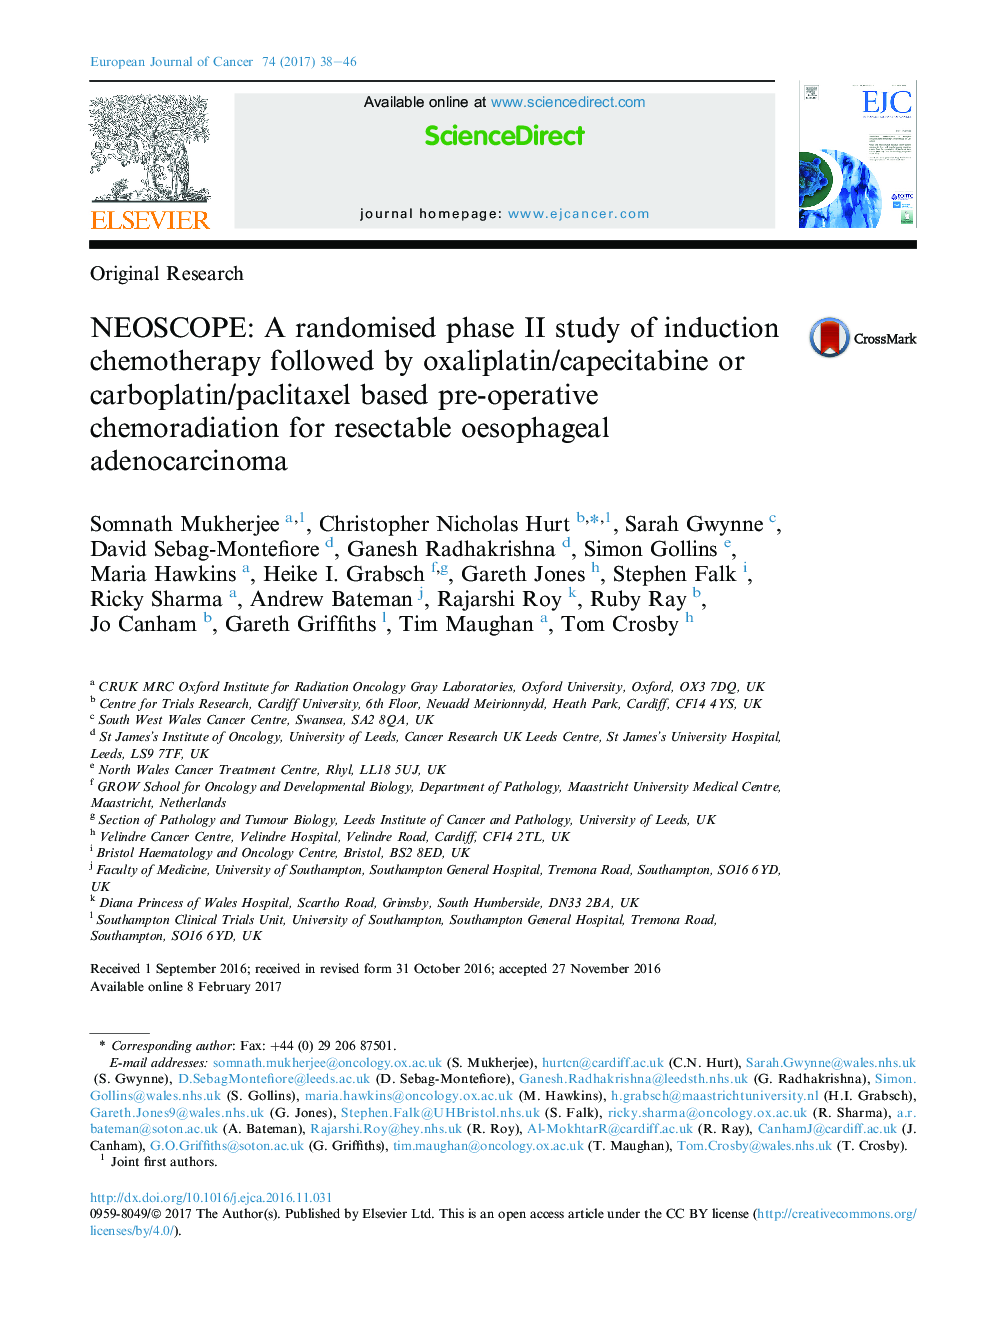 NEOSCOPE: A randomised phase II study of induction chemotherapy followed by oxaliplatin/capecitabine or carboplatin/paclitaxel based pre-operative chemoradiation for resectable oesophageal adenocarcinoma